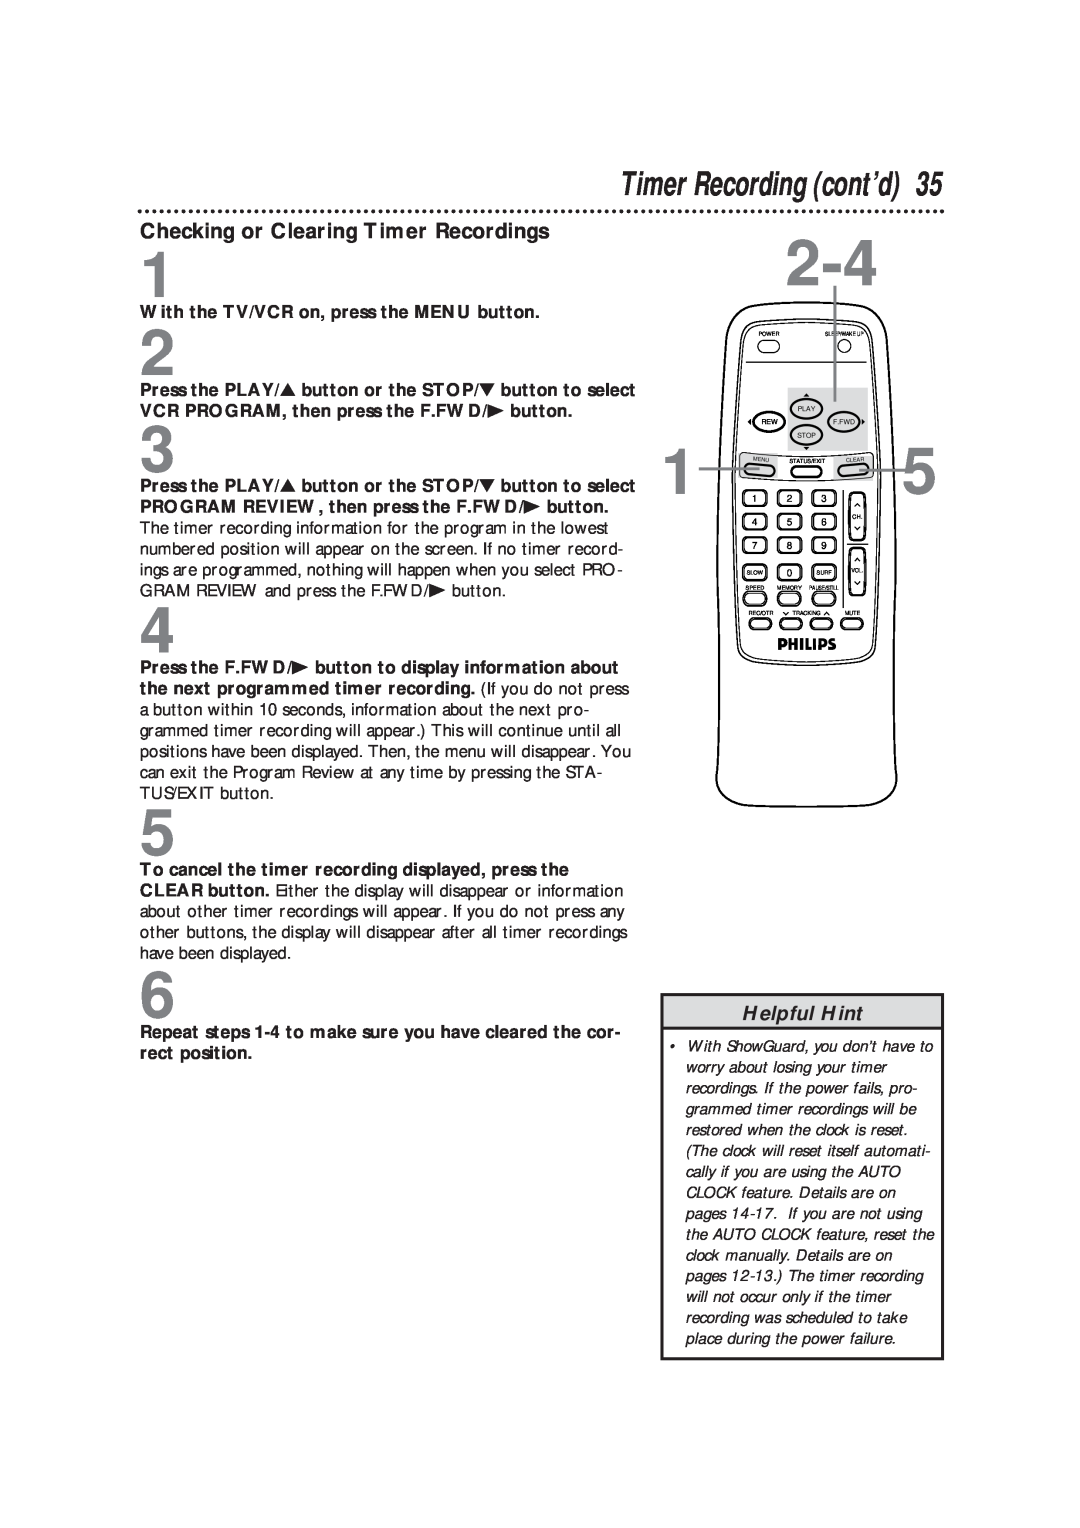 Magnavox CCB193AT owner manual Checking or Clearing Timer Recordings, Timer Recording cont’d, Helpful Hint 